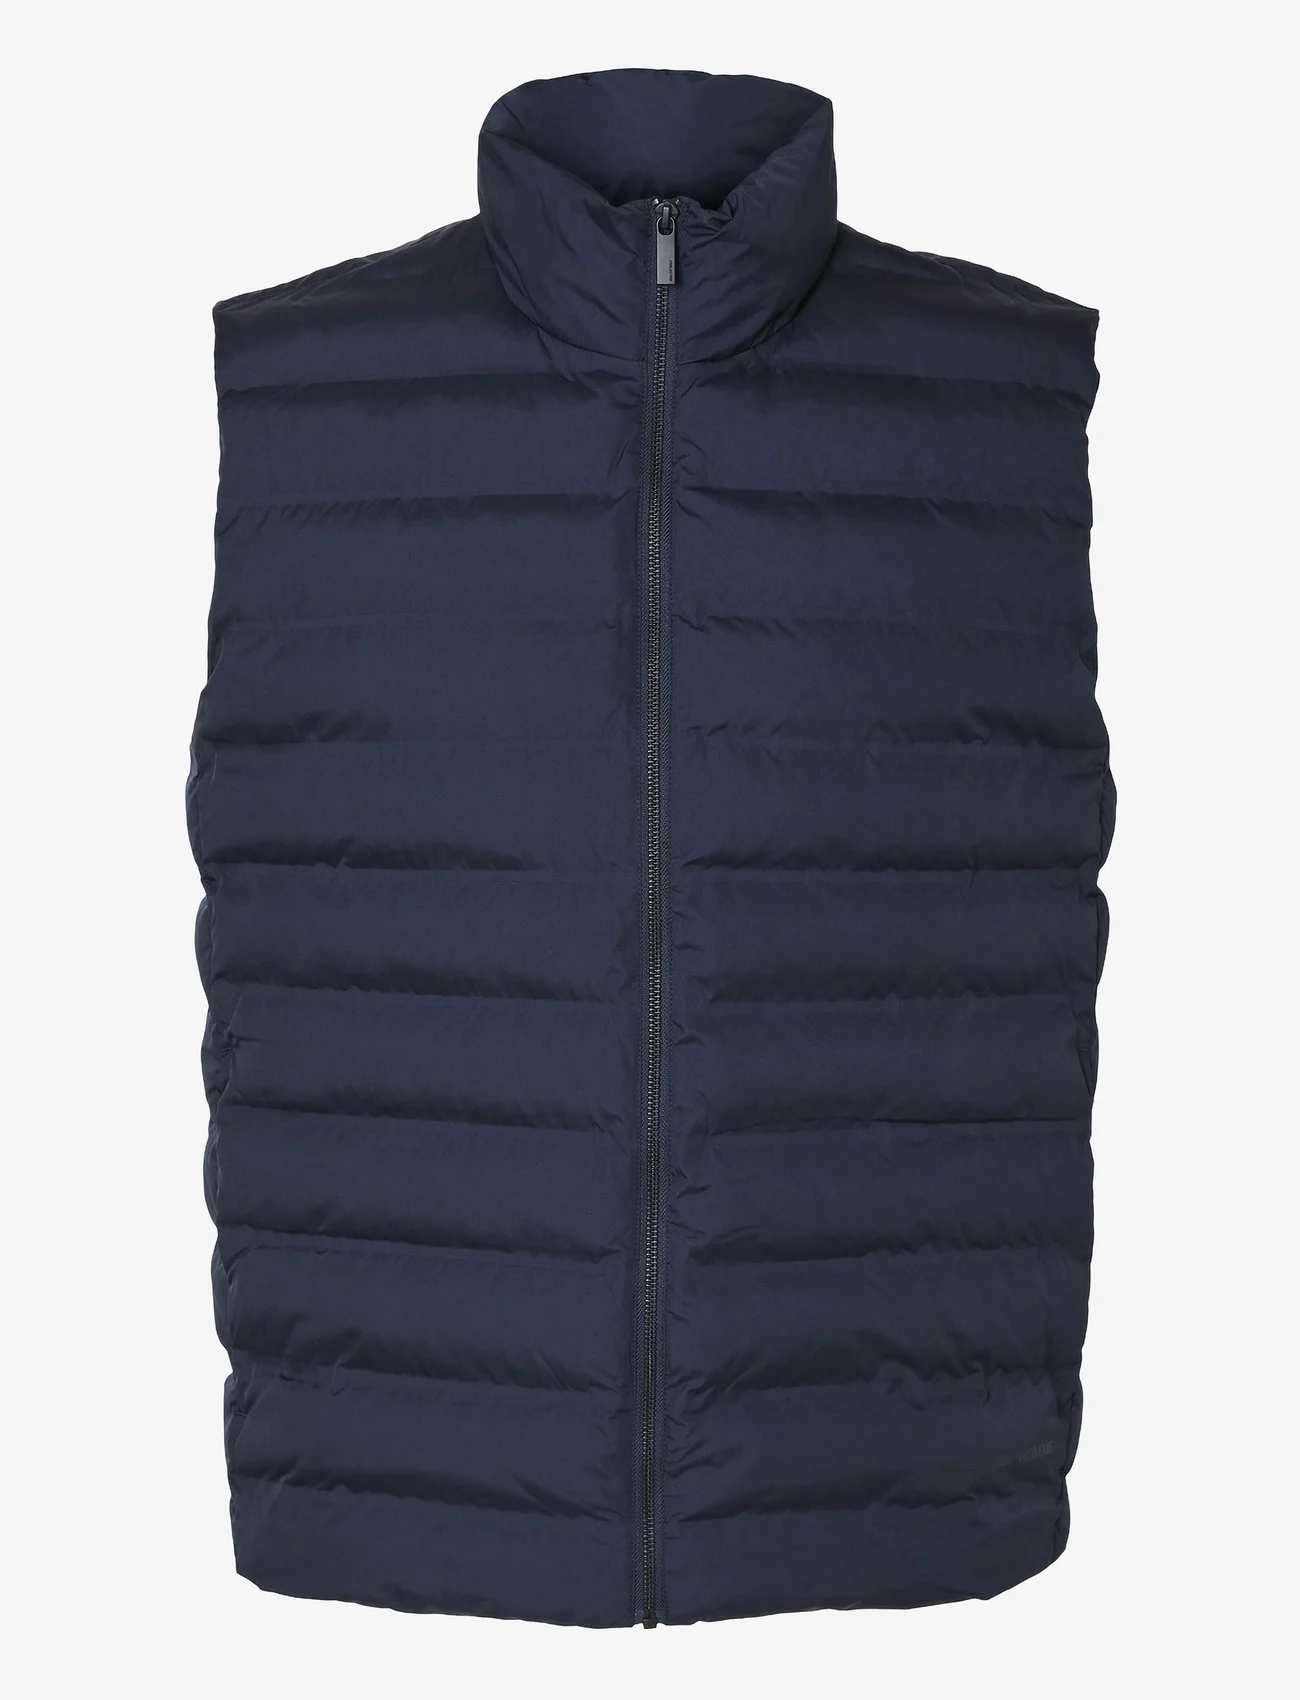 Selected Homme - SLHBARRY QUILTED GILET NOOS - vestes - sky captain - 0